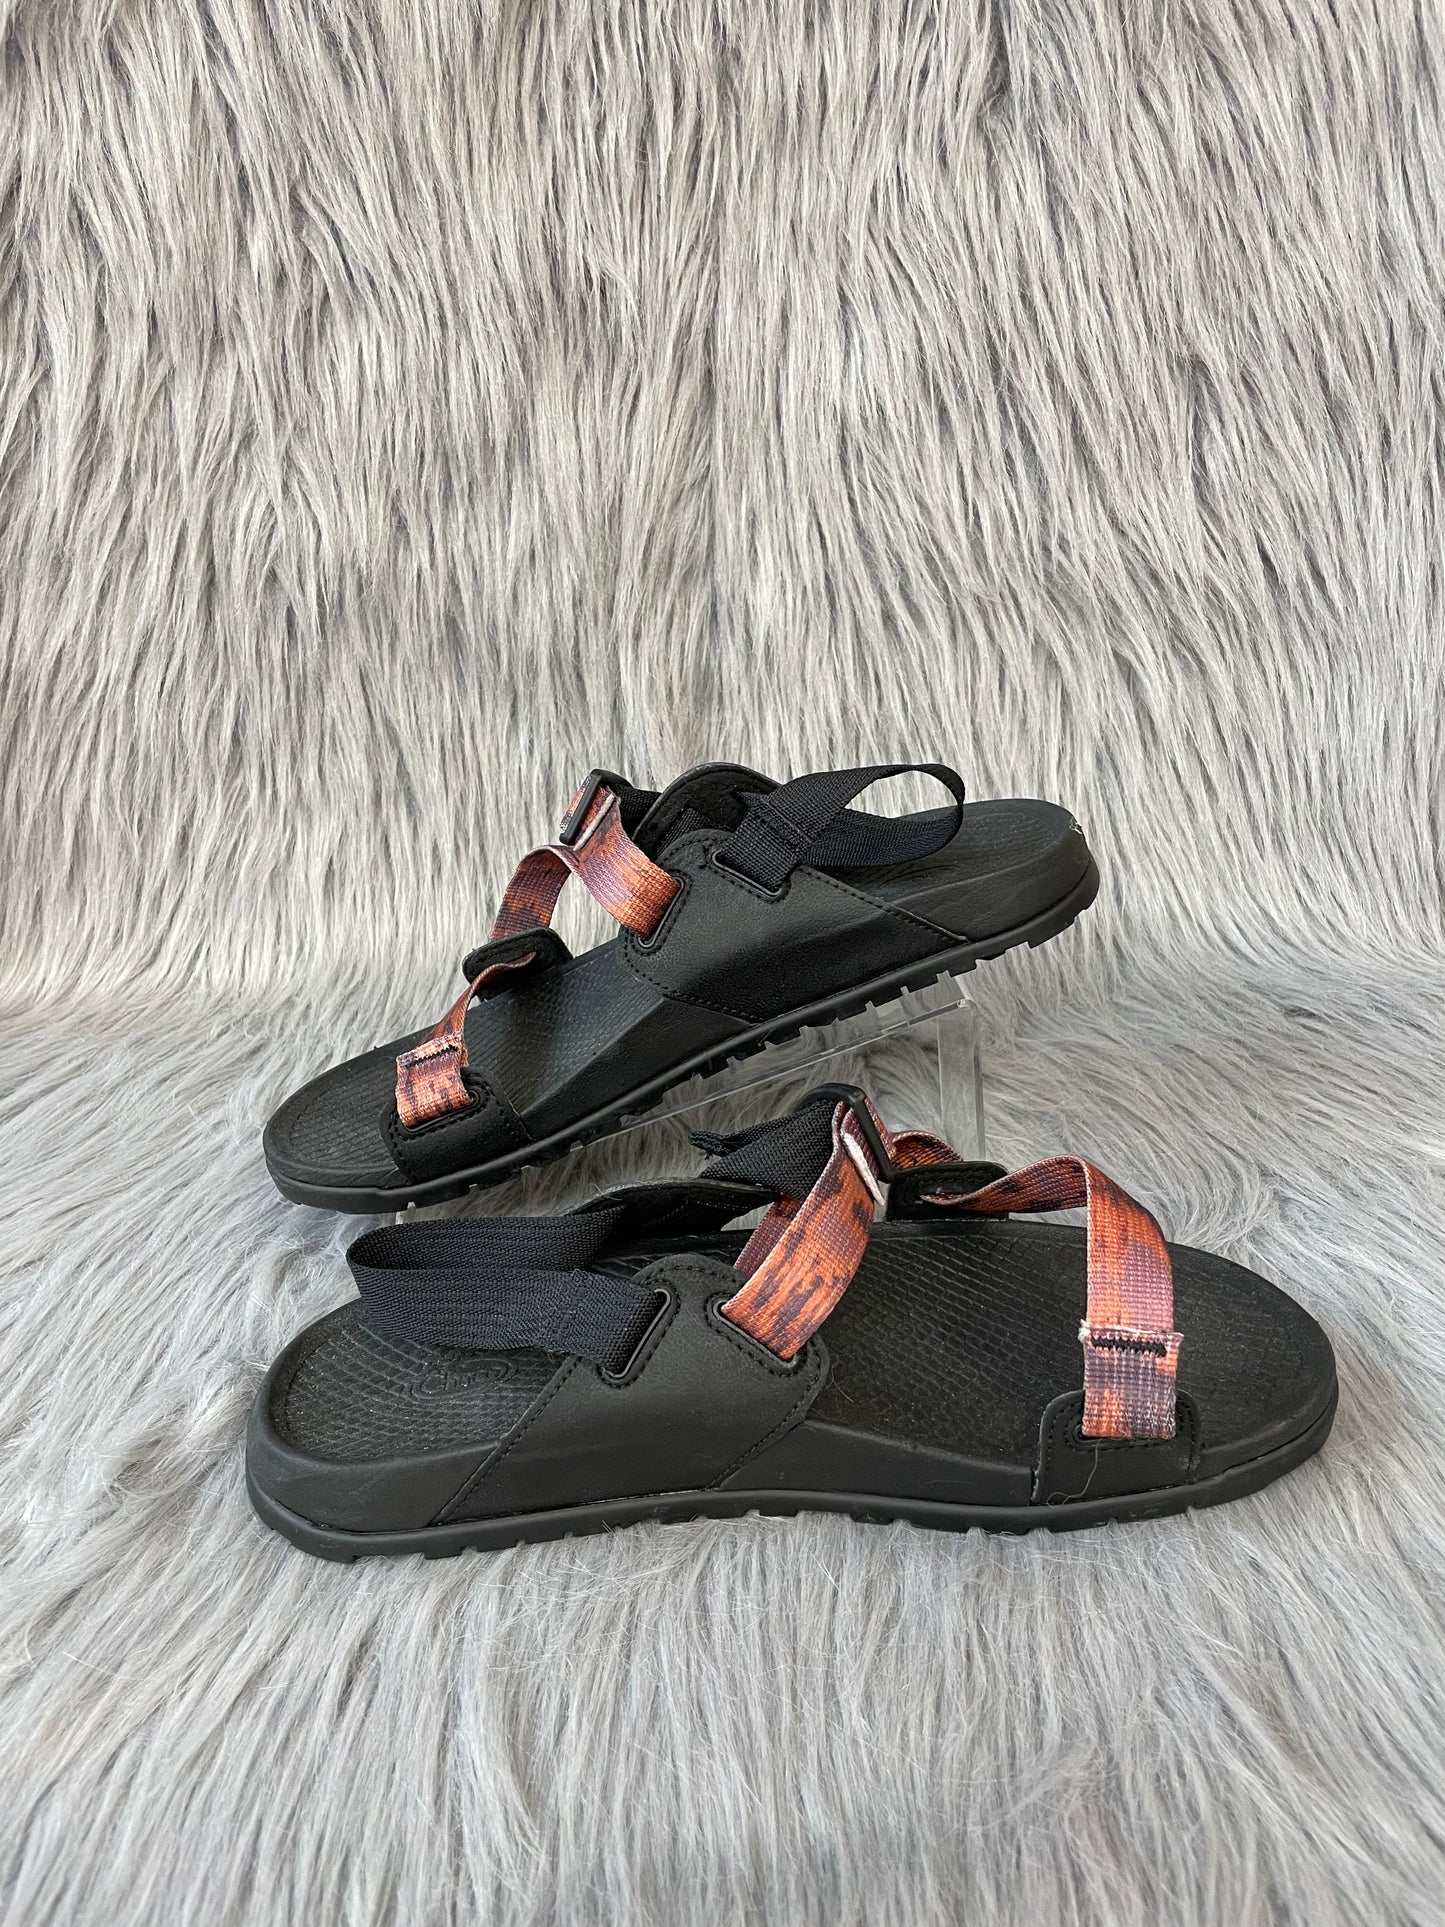 Sandals Sport By Chacos  Size: 8